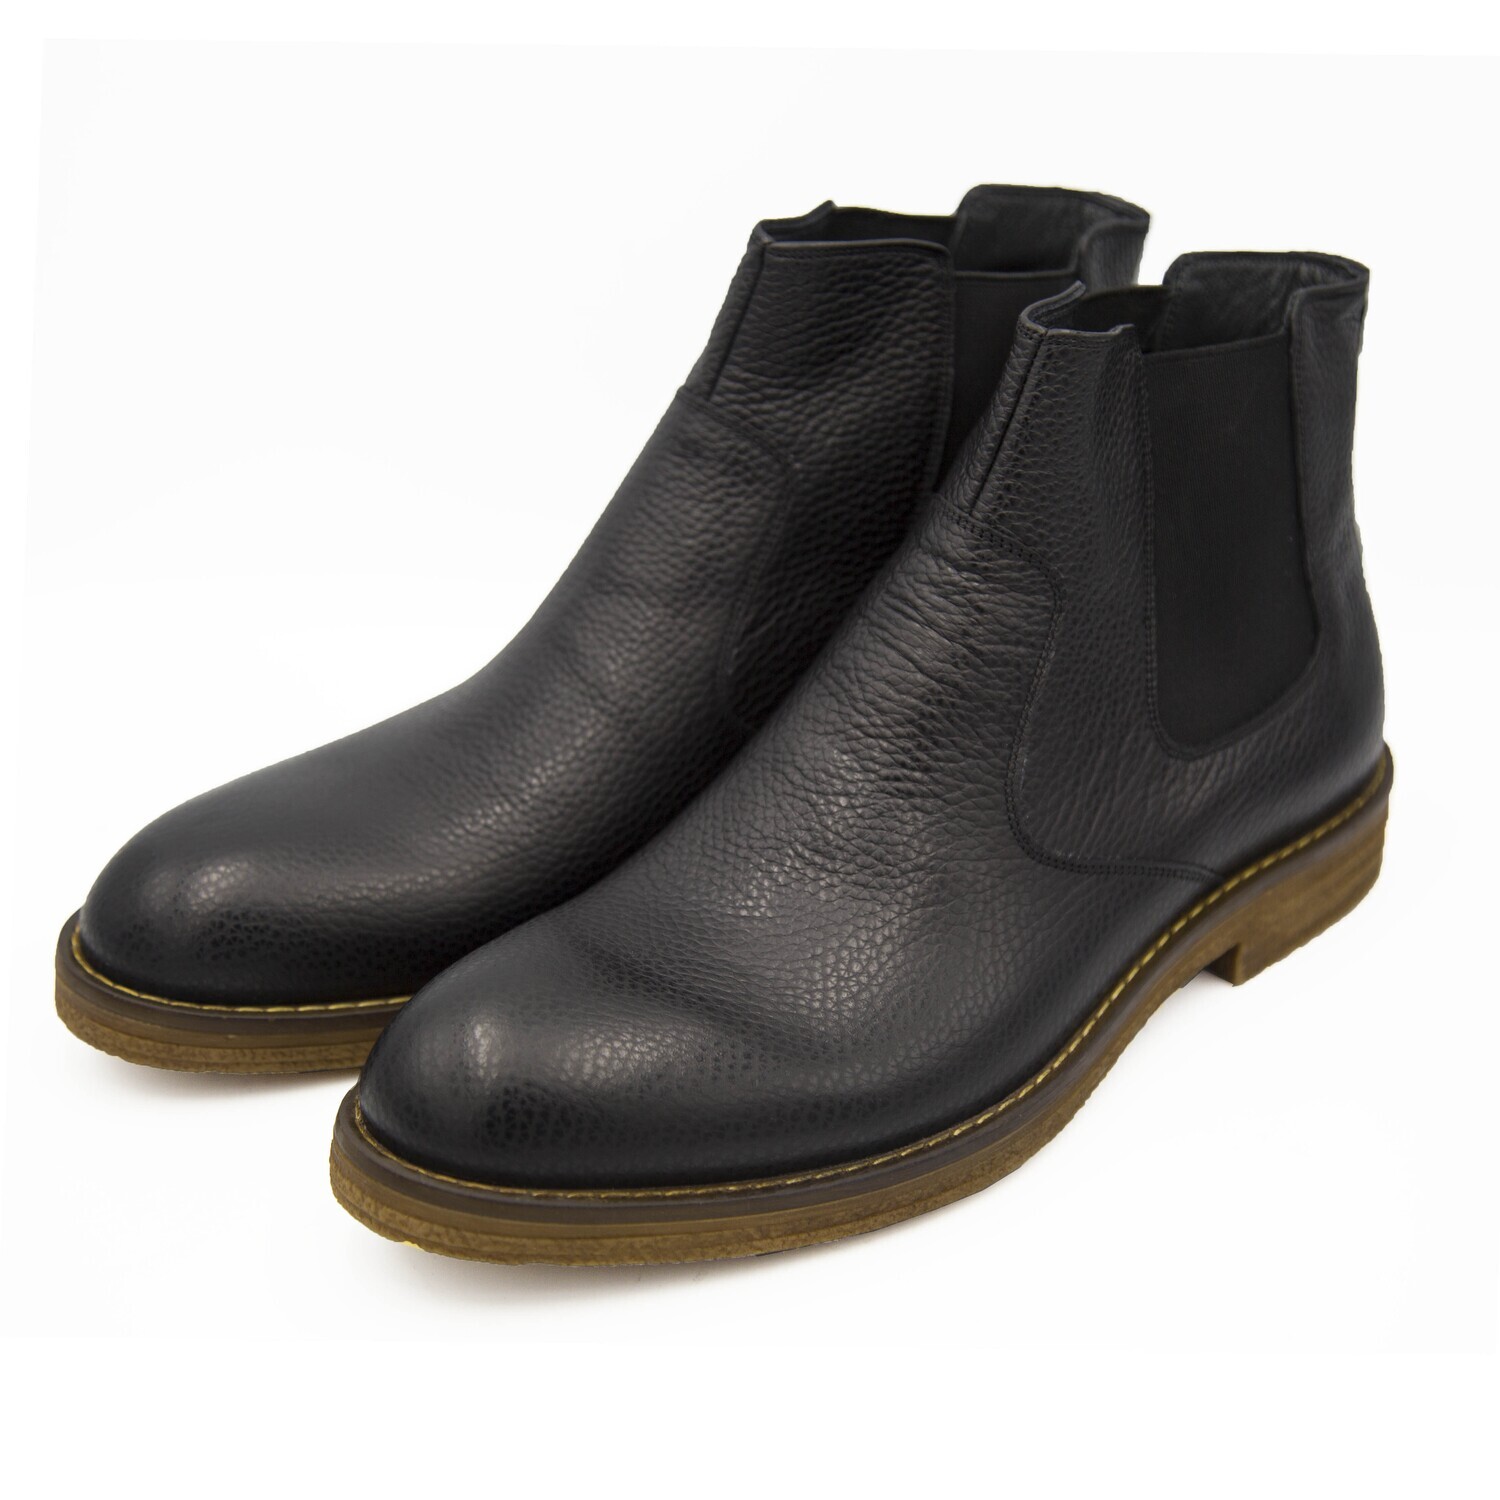 100% pure leather boots for men